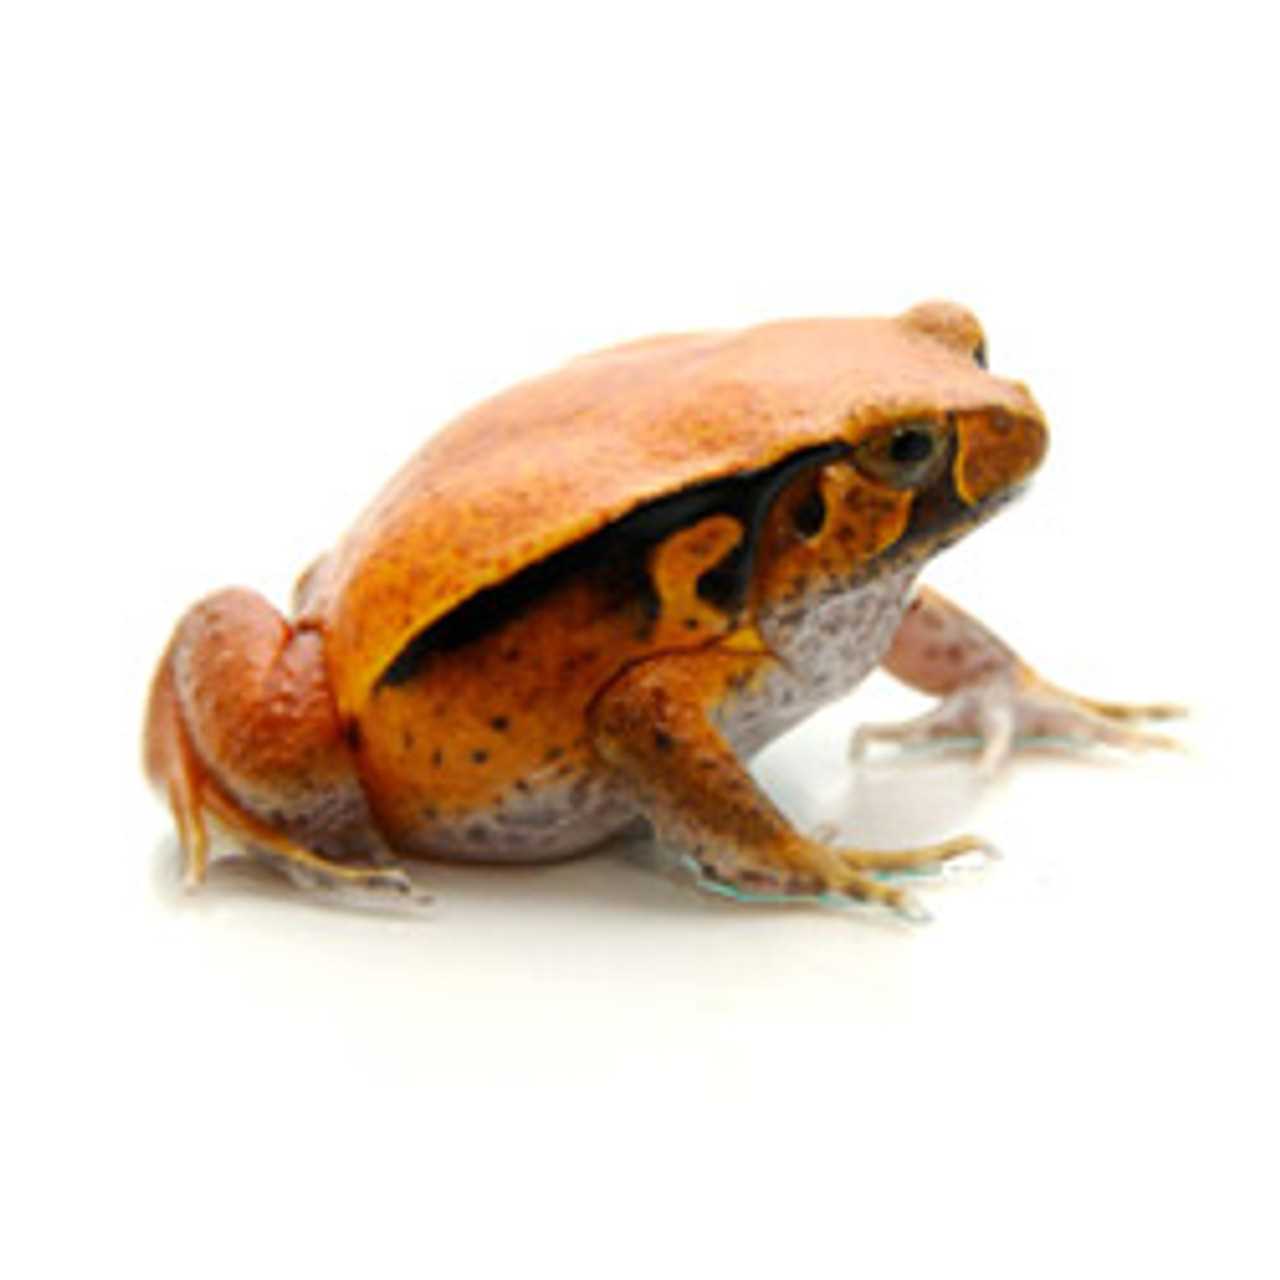 The best price to buy Tomato Frog